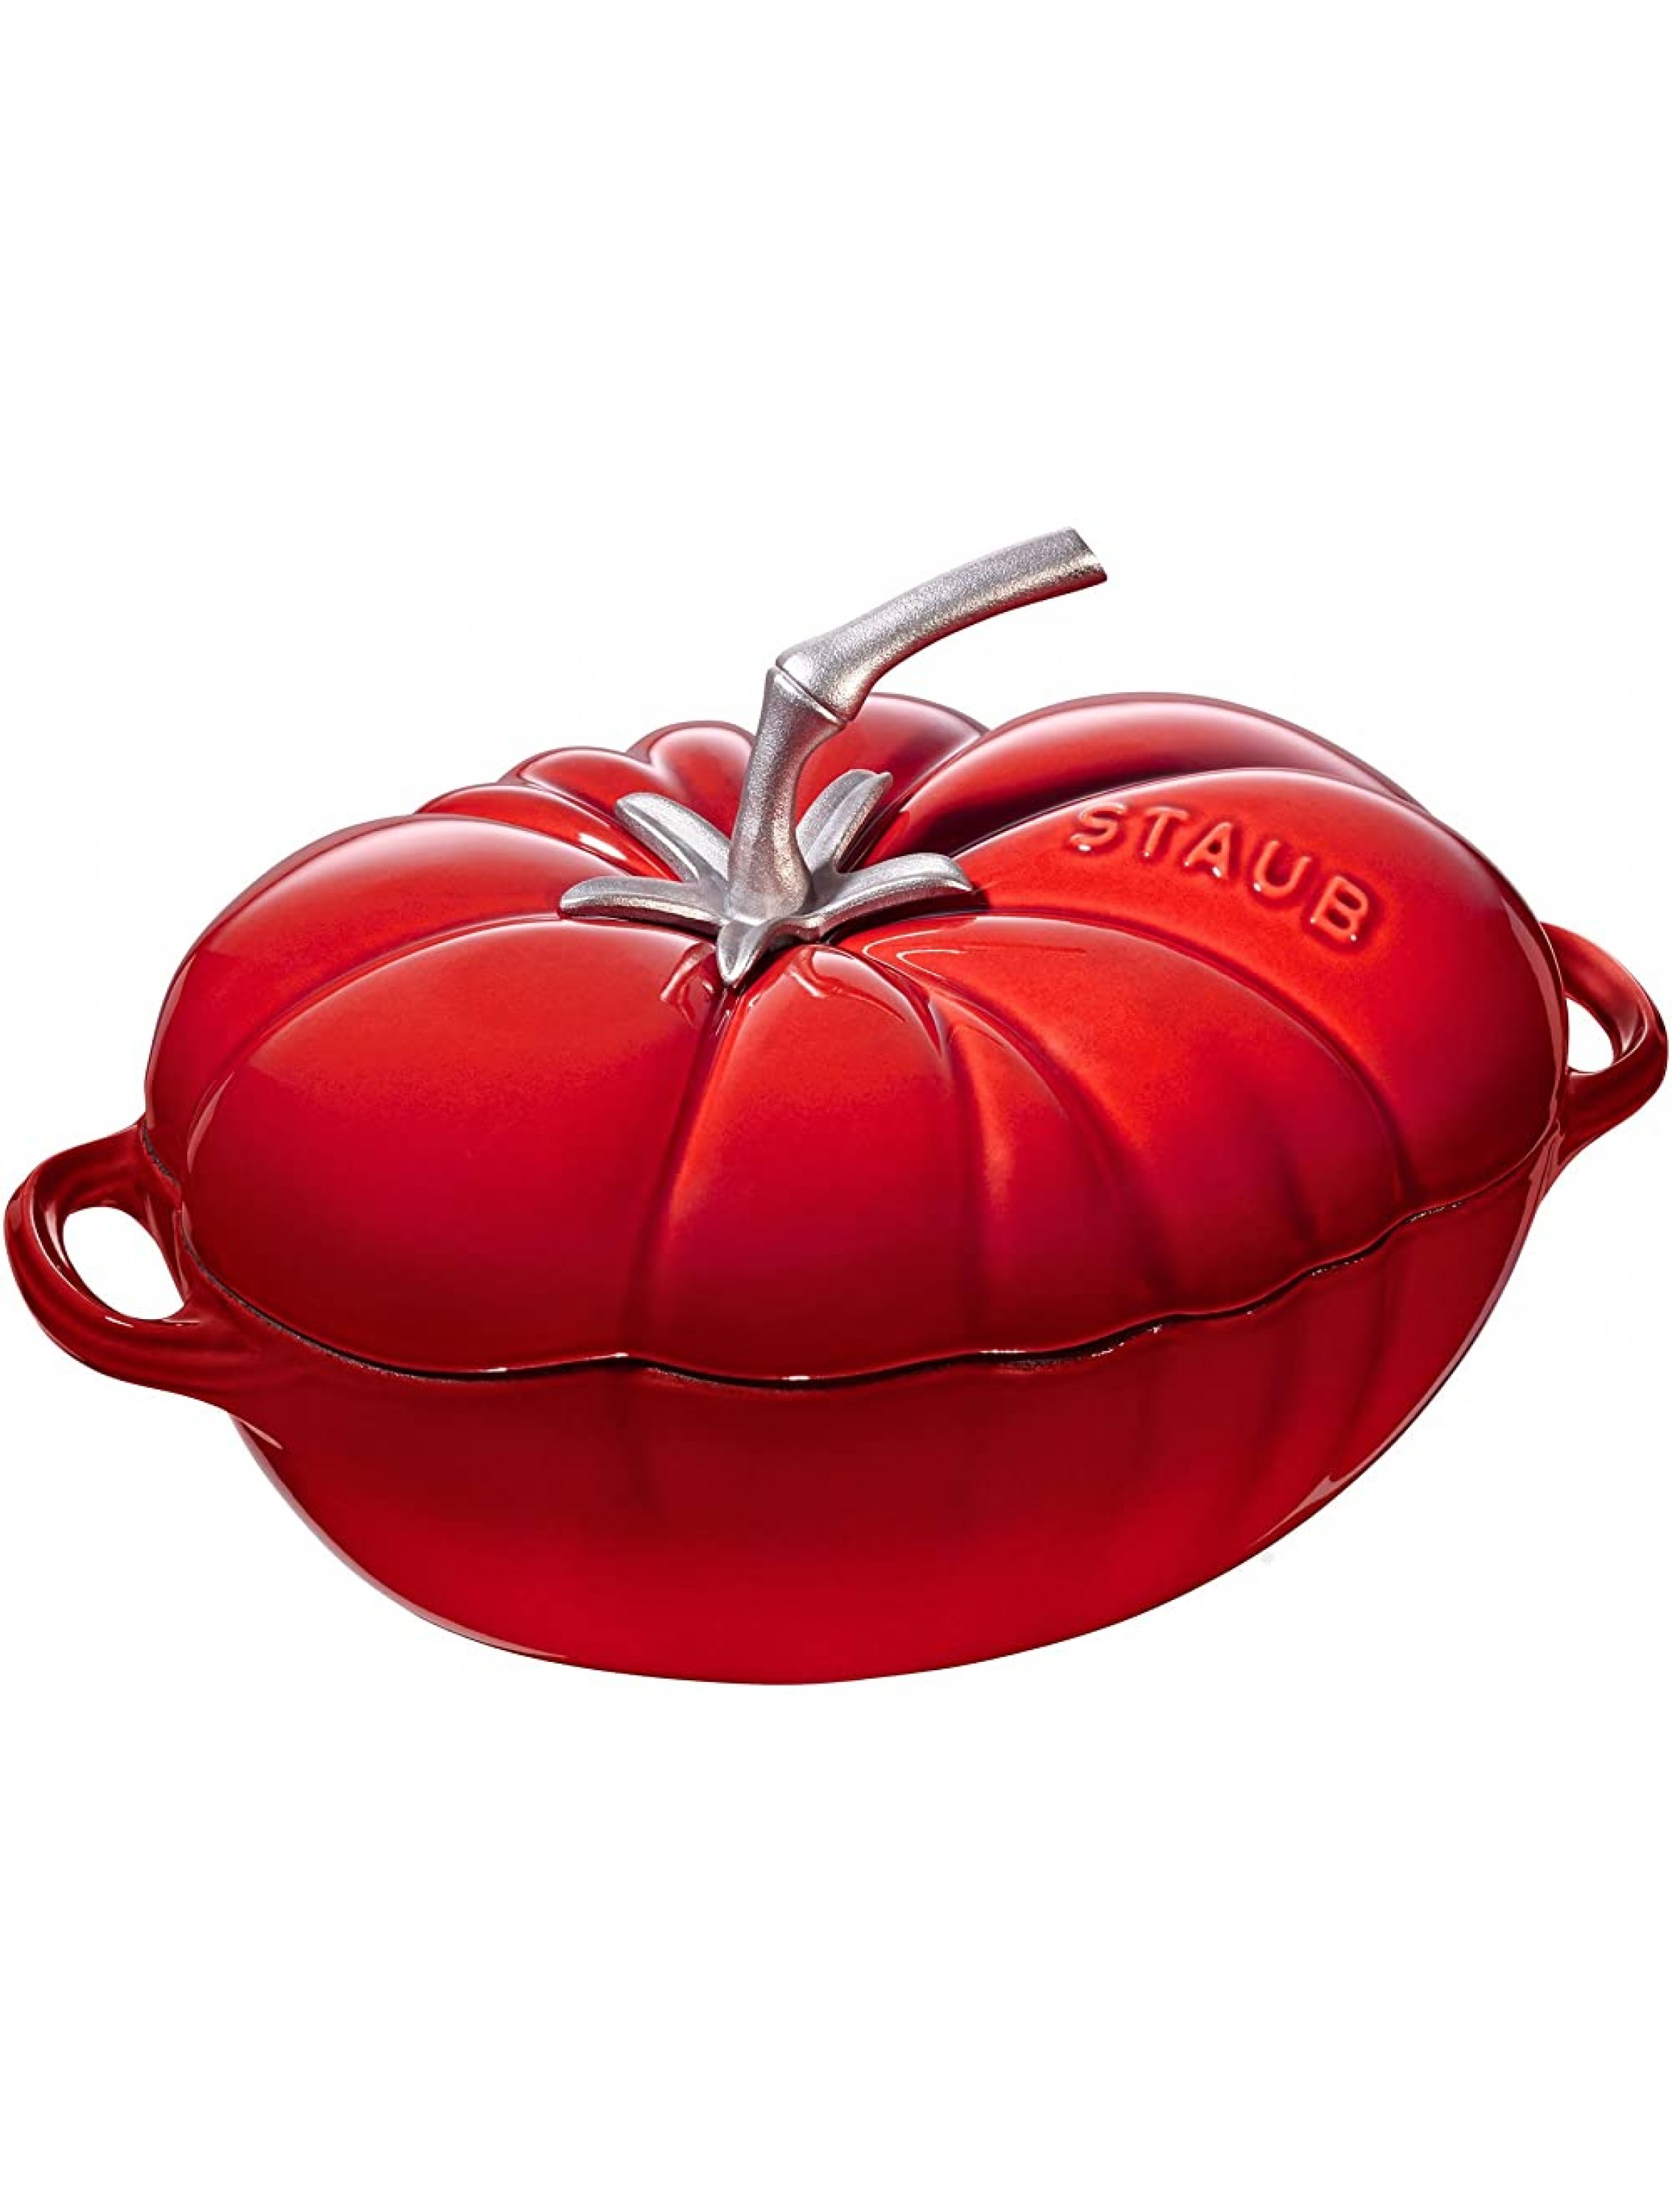 Staub Cast Iron 3-qt Tomato Cocotte Cherry Made in France - B88AUU6KN